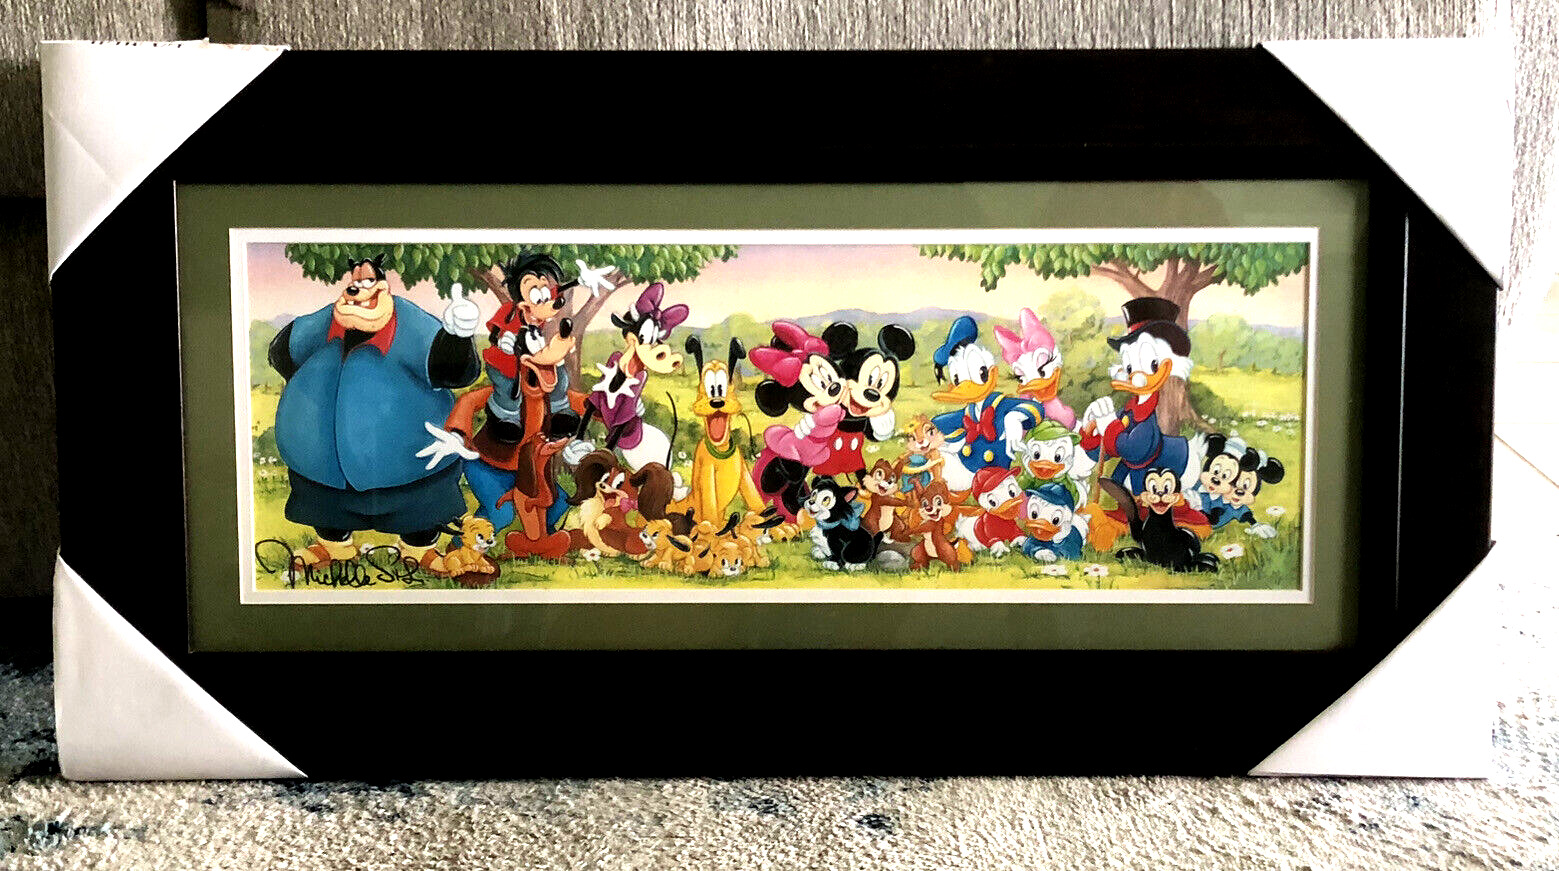 DISNEY FINE ART FAMILY DYNASTY MICKEY MOUSE FRAME LITHOGRAPH MICHELLE ST LAURENT